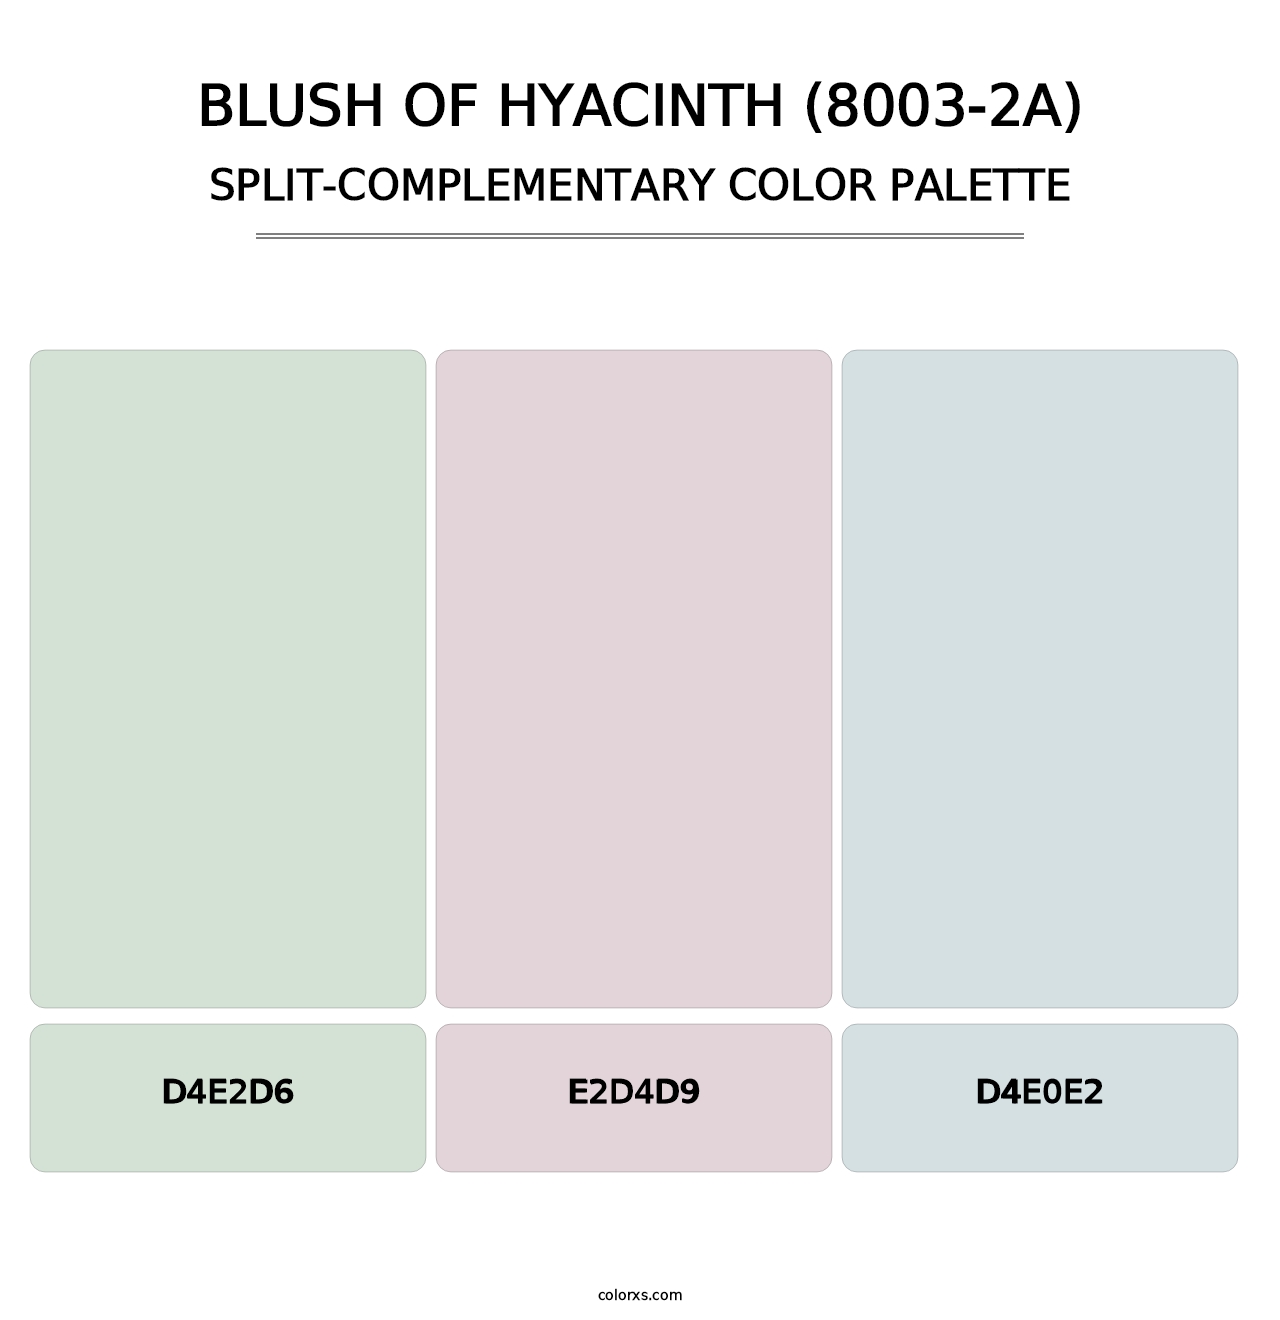 Blush of Hyacinth (8003-2A) - Split-Complementary Color Palette